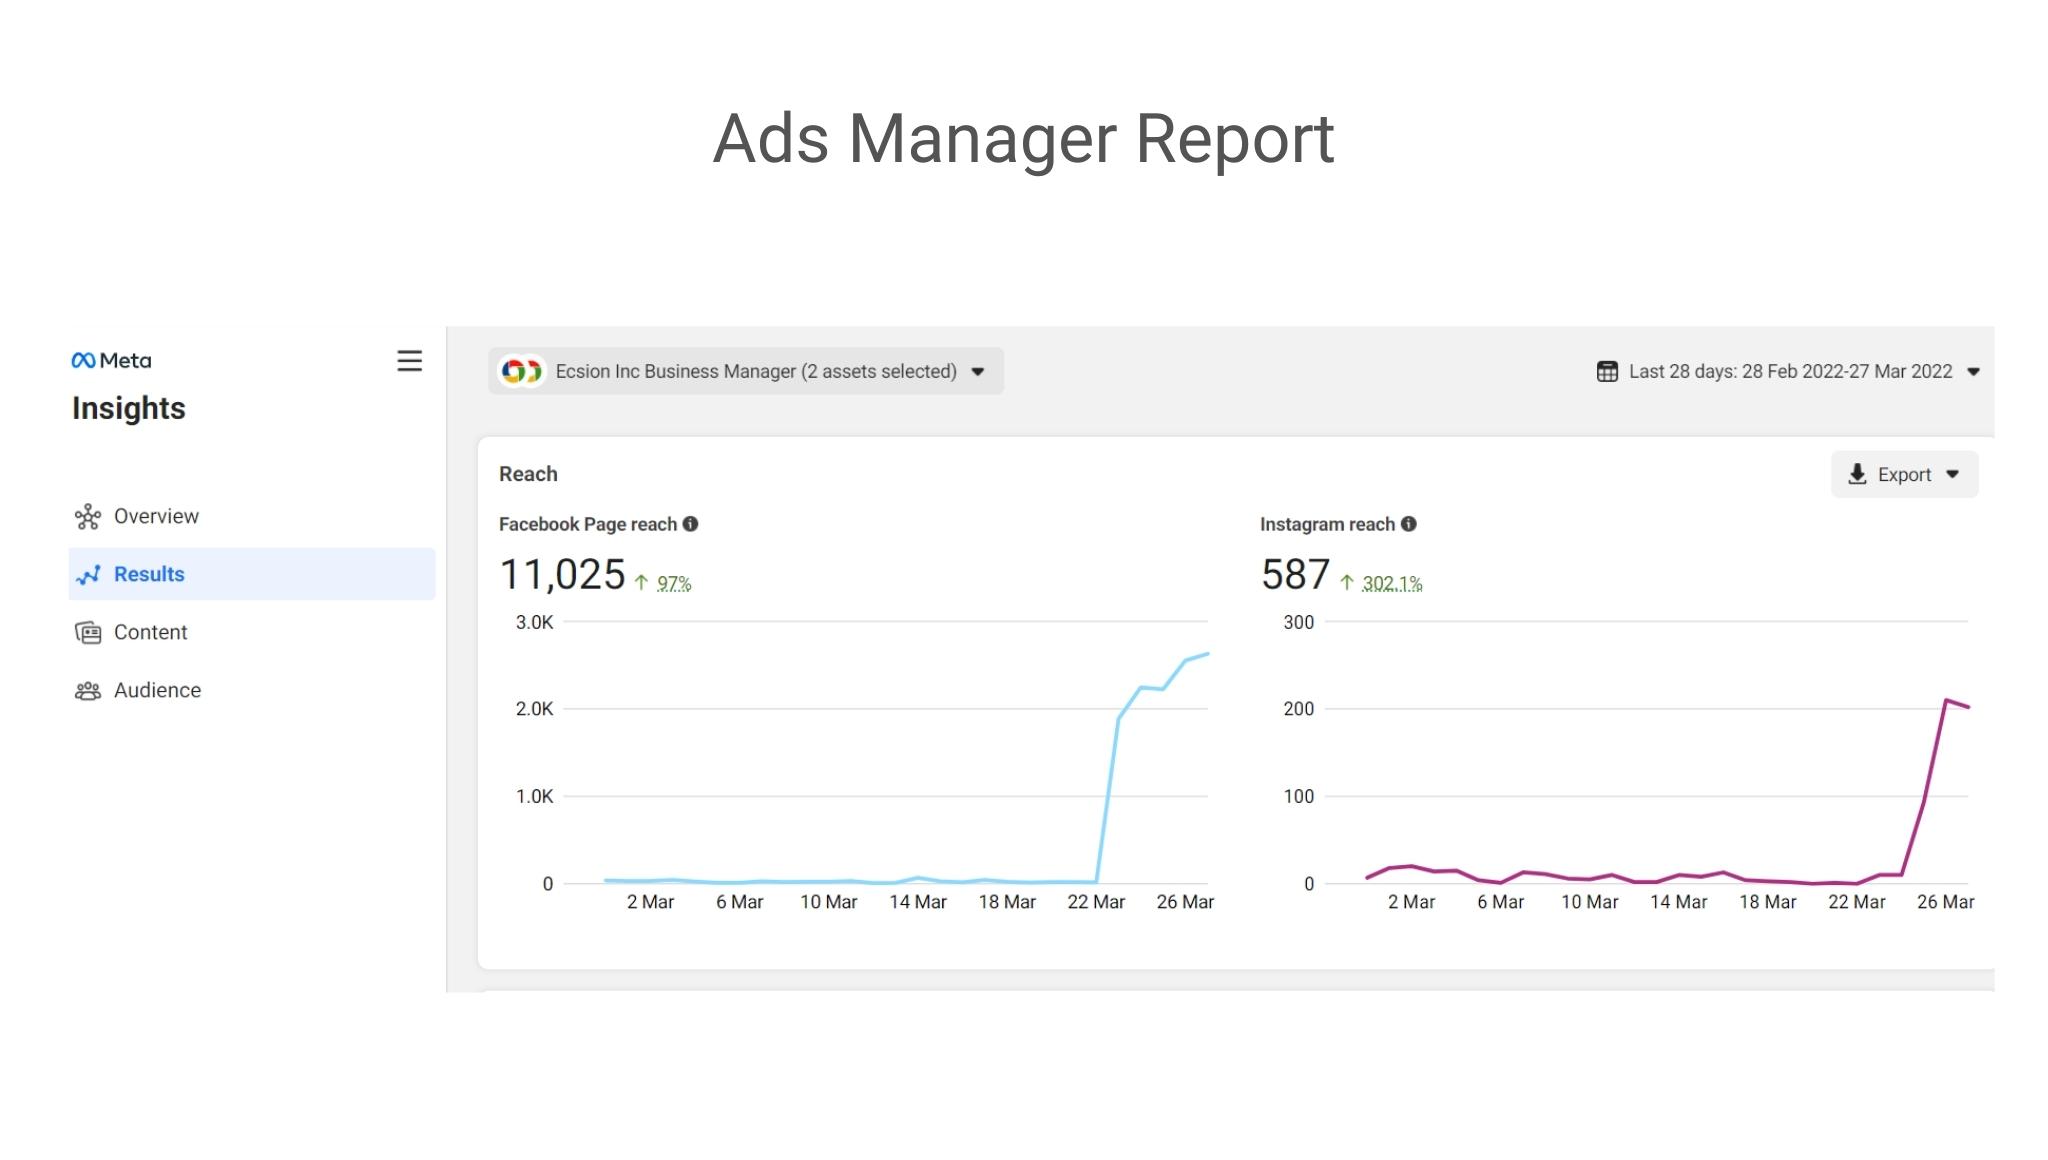 Share ads manager reports 